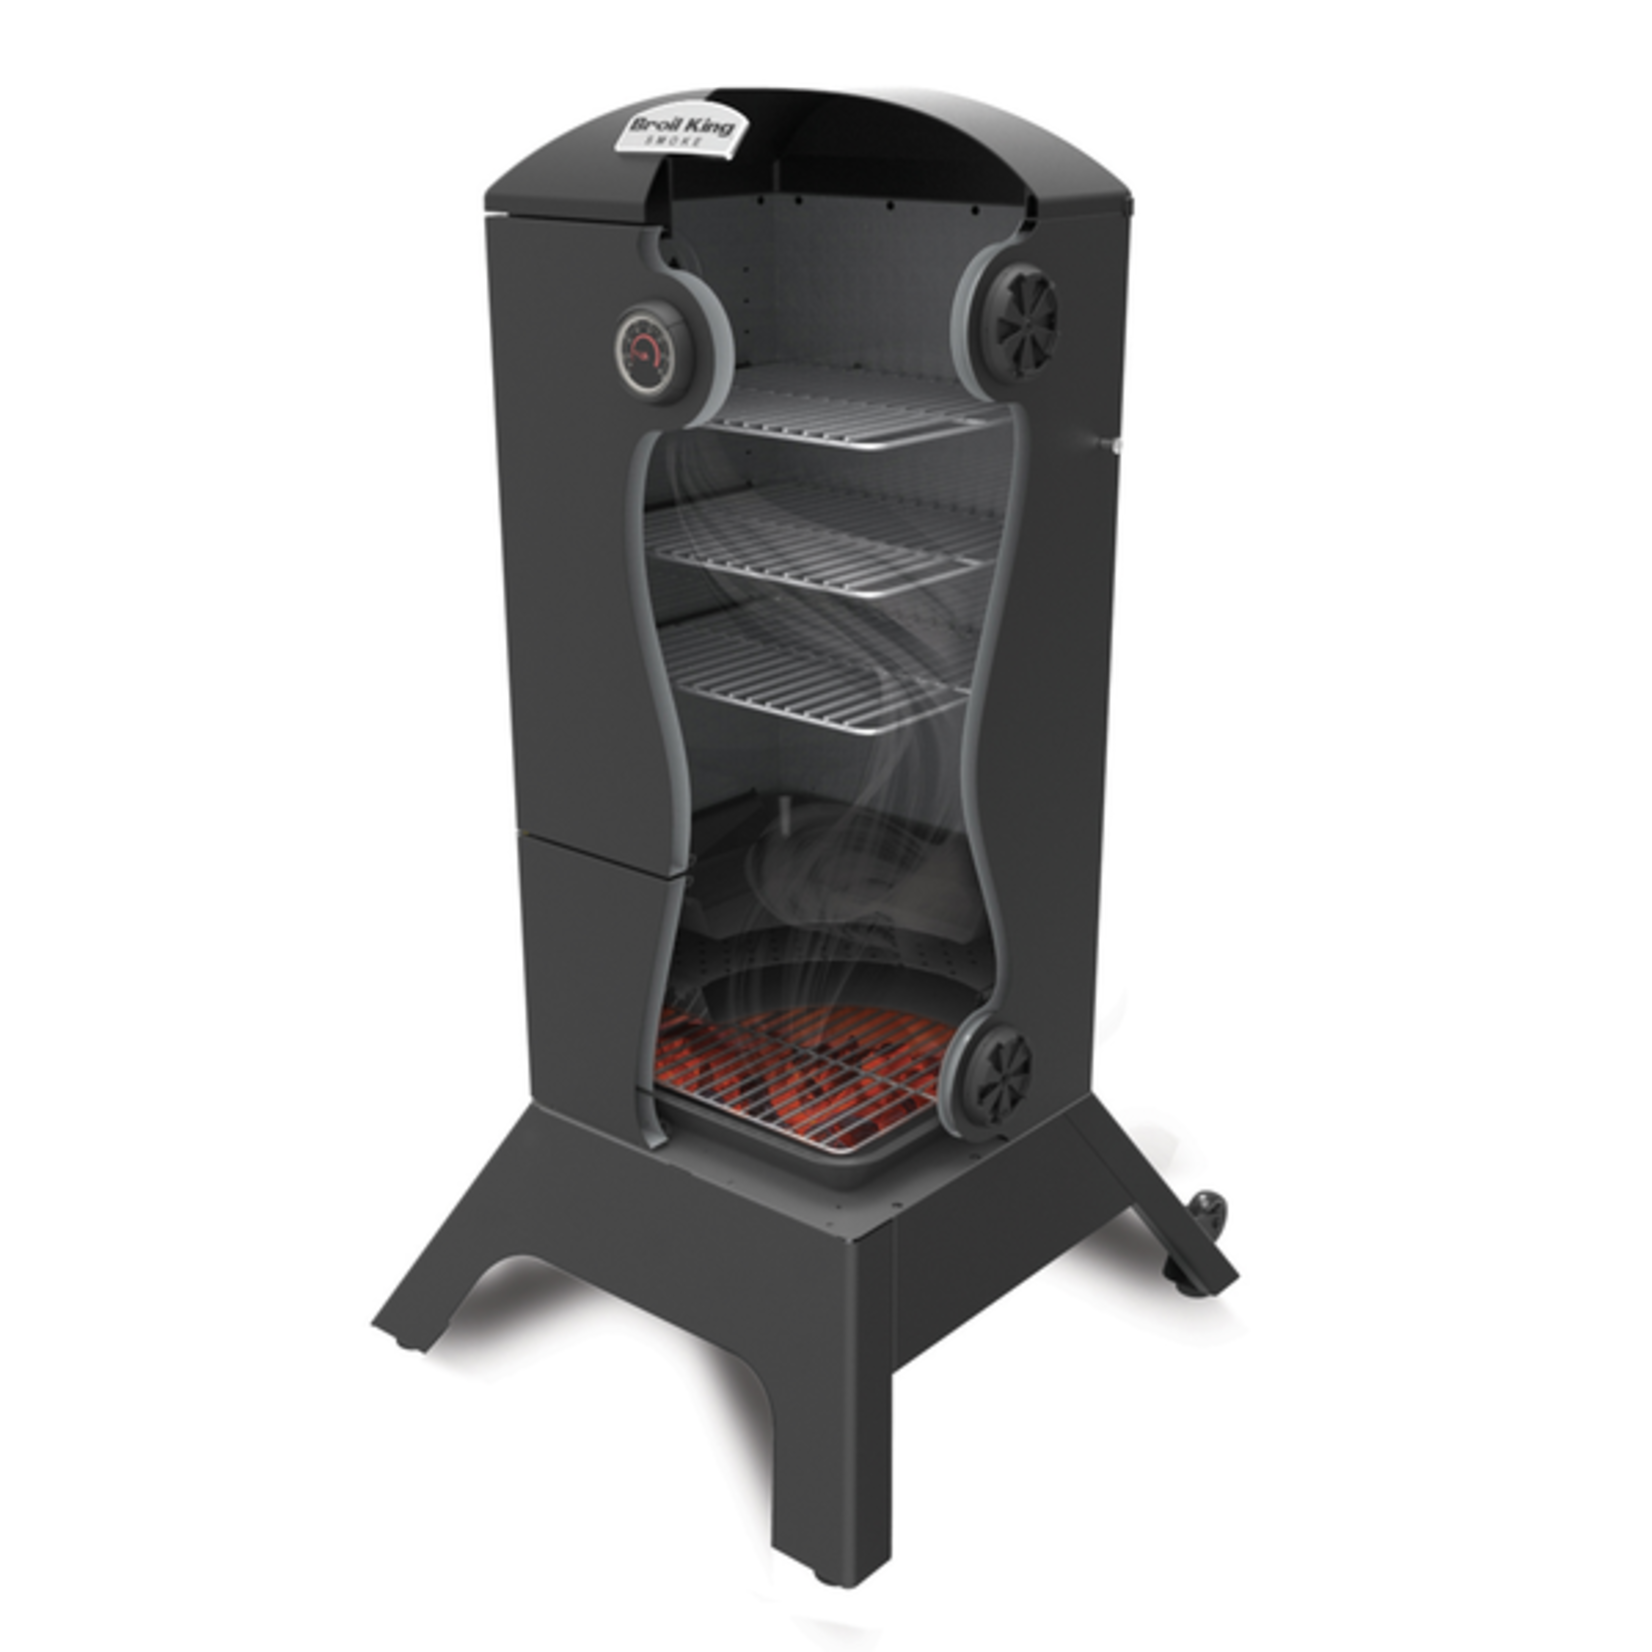 Broil King Vertical Charcoal Smoker